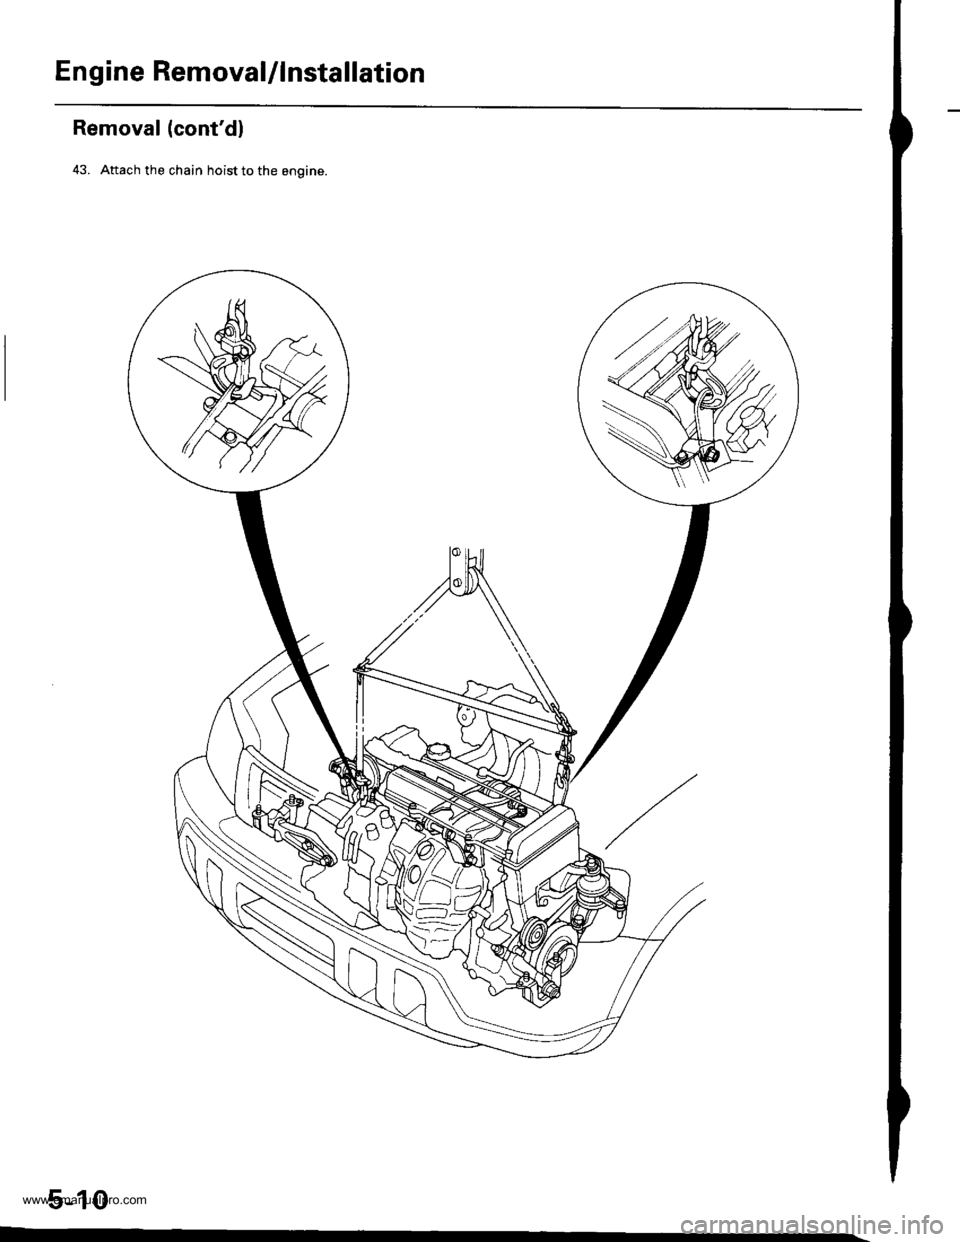 HONDA CR-V 1997 RD1-RD3 / 1.G Service Manual 
Engine RemovaUlnstallation
Removal (contdl
43. Attach the chain hoist to the engine.
5-10
www.emanualpro.com  